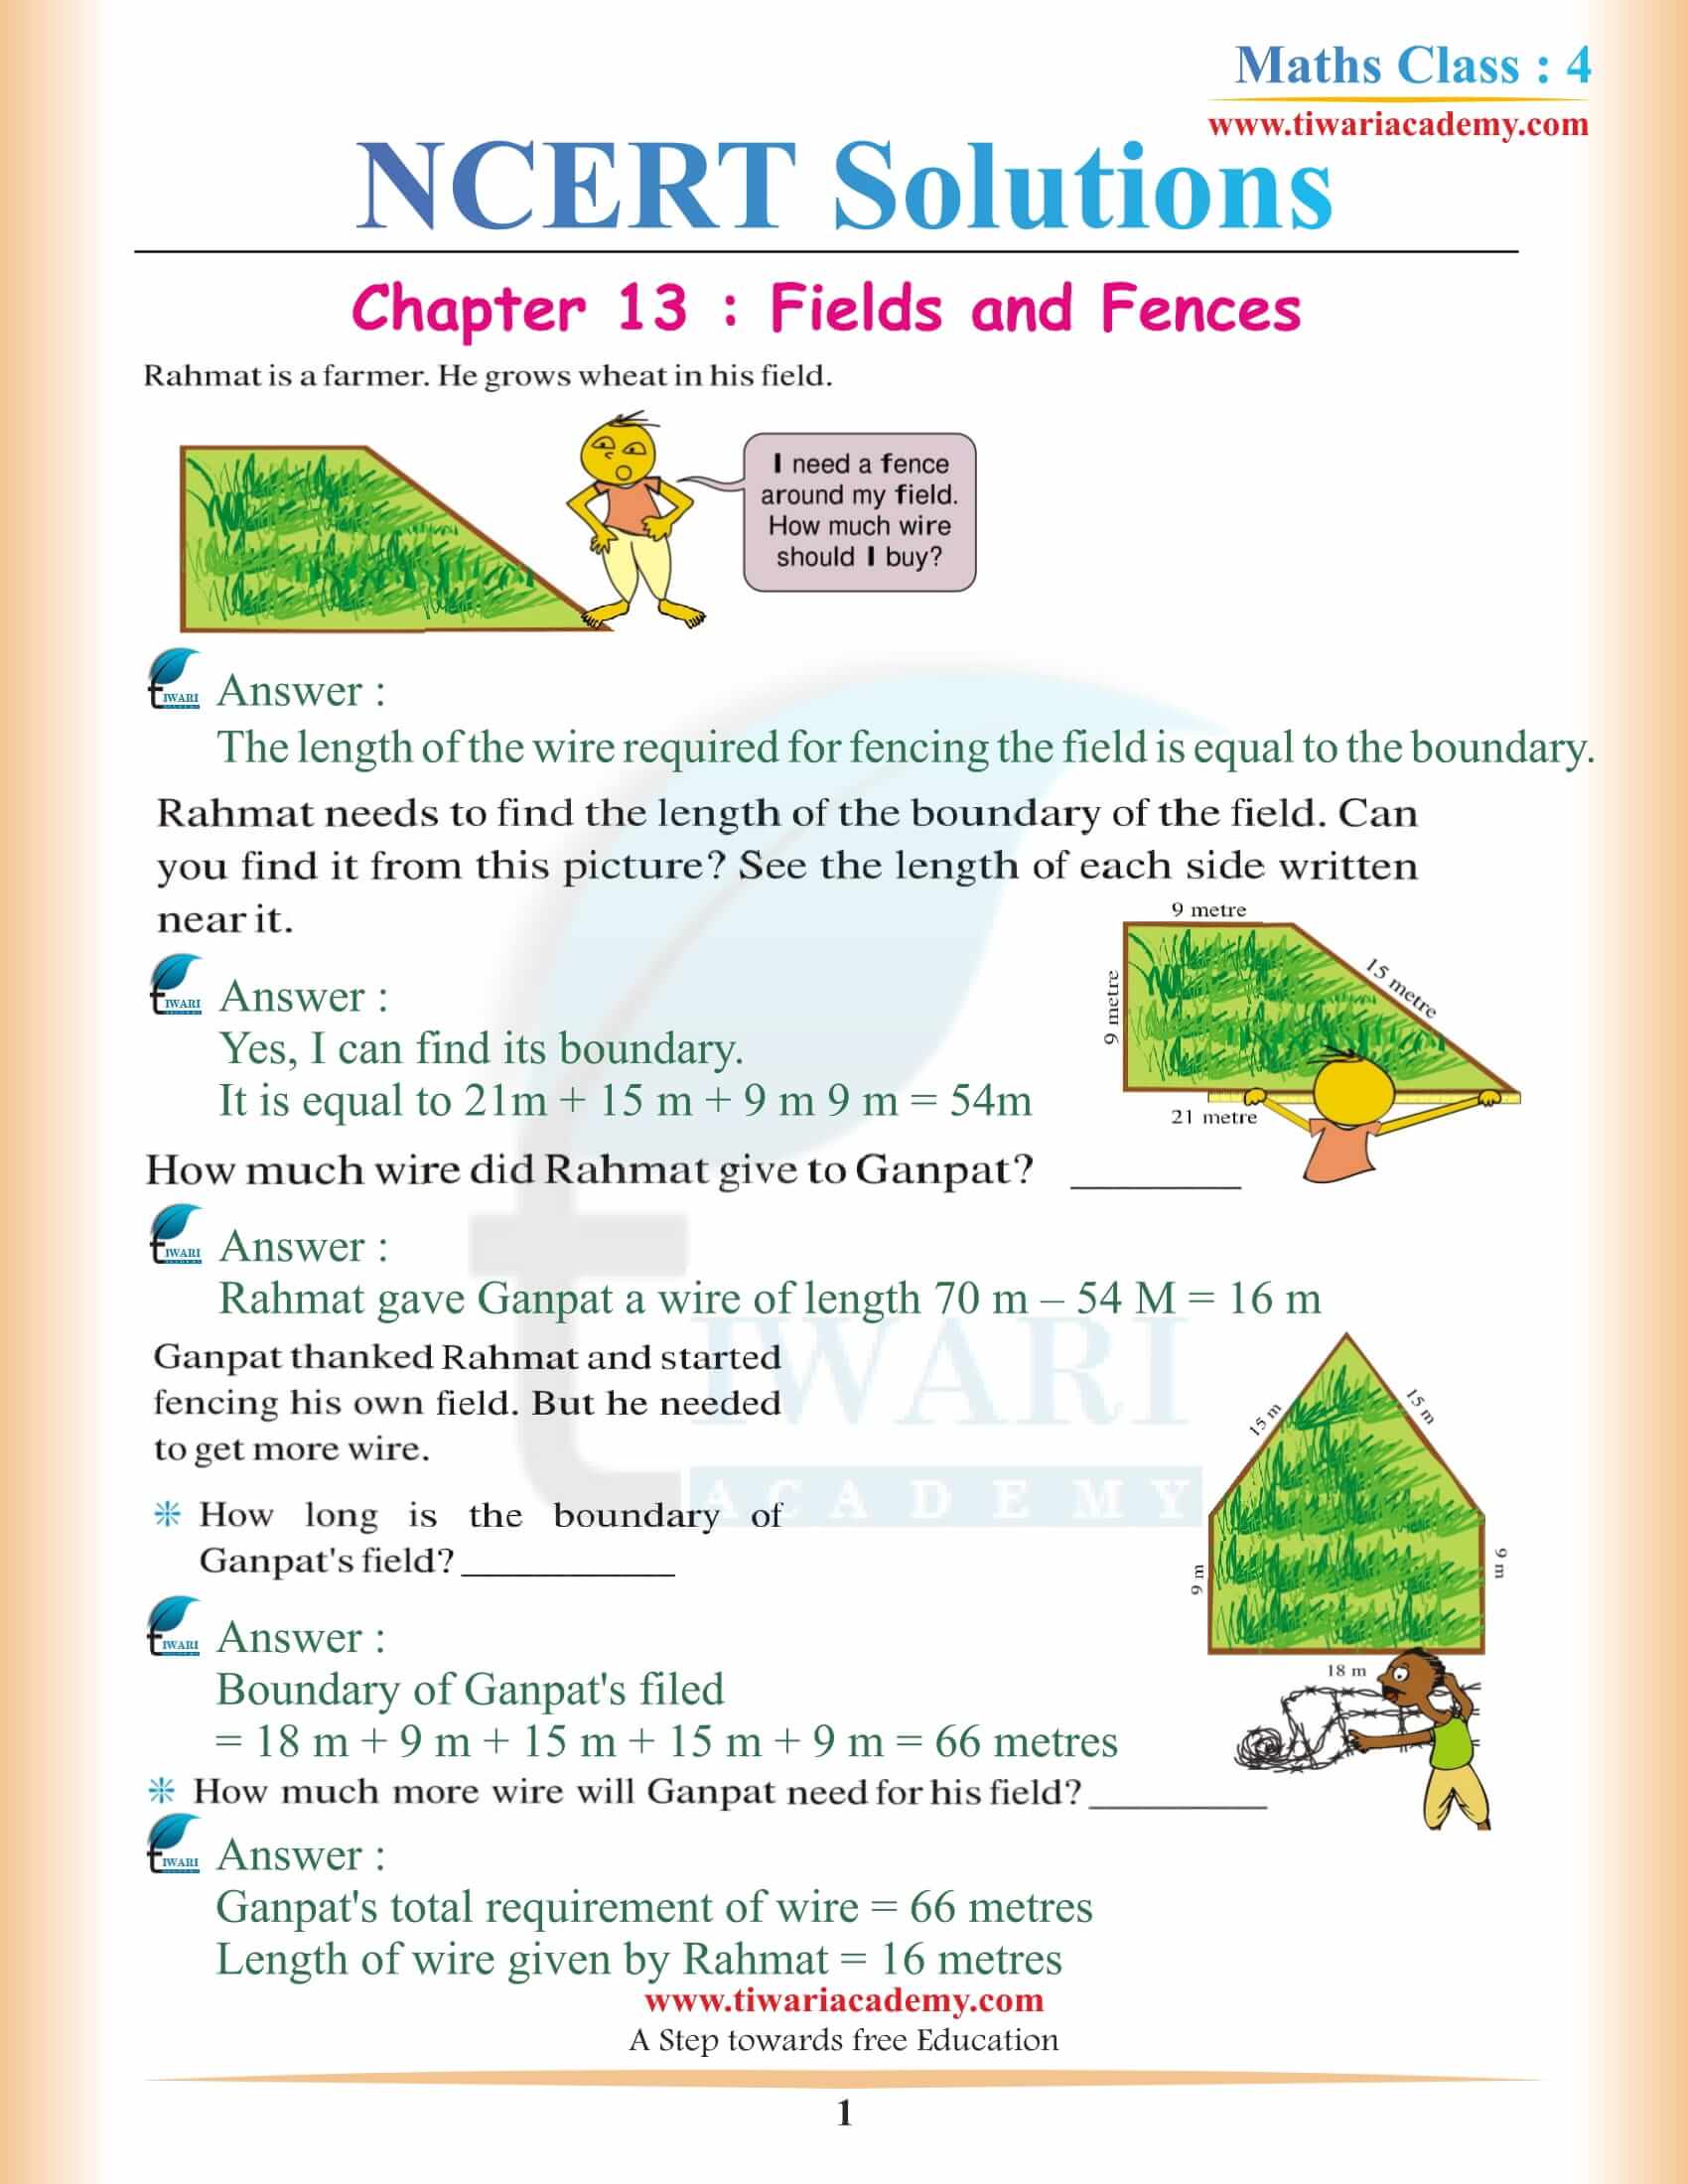 NCERT Solutions for Class 4 Maths Chapter 13 Fields and Fences